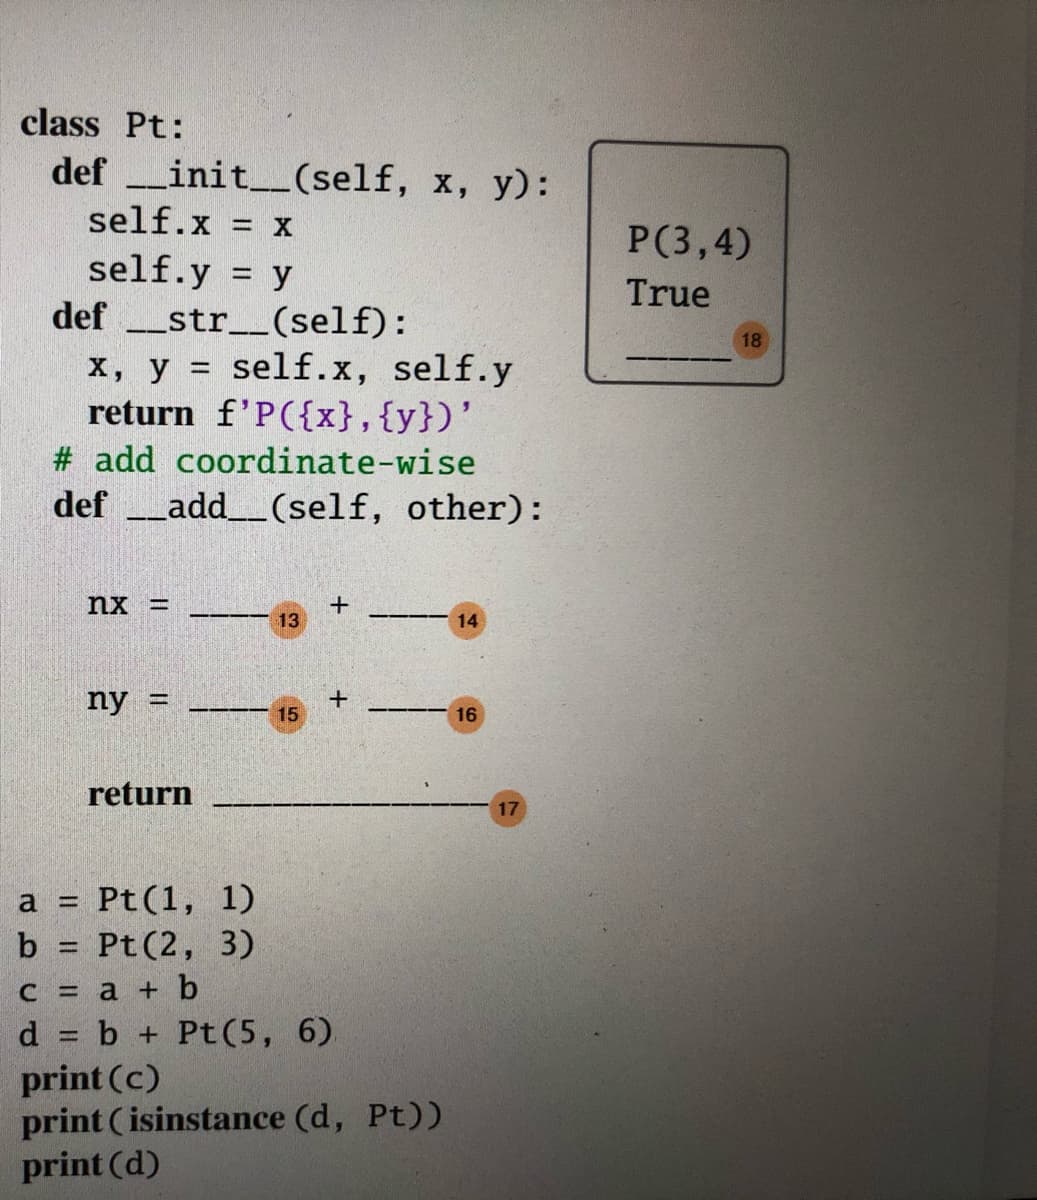 class Pt:
def init_(self, x, y):
self.x X
P(3,4)
self.y = y
def _str__(self):
x, y = self.x, self.y
return f'P({x},{y})'
True
18
# add coordinate-wise
def add_(self, other):
nx =
13
14
ny =
15
16
return
17
Pt(1, 1)
b = Pt (2, 3)
с %3D а + b
d = b + Pt(5, 6)
print (c)
print ( isinstance (d, Pt))
print (d)
%3D
